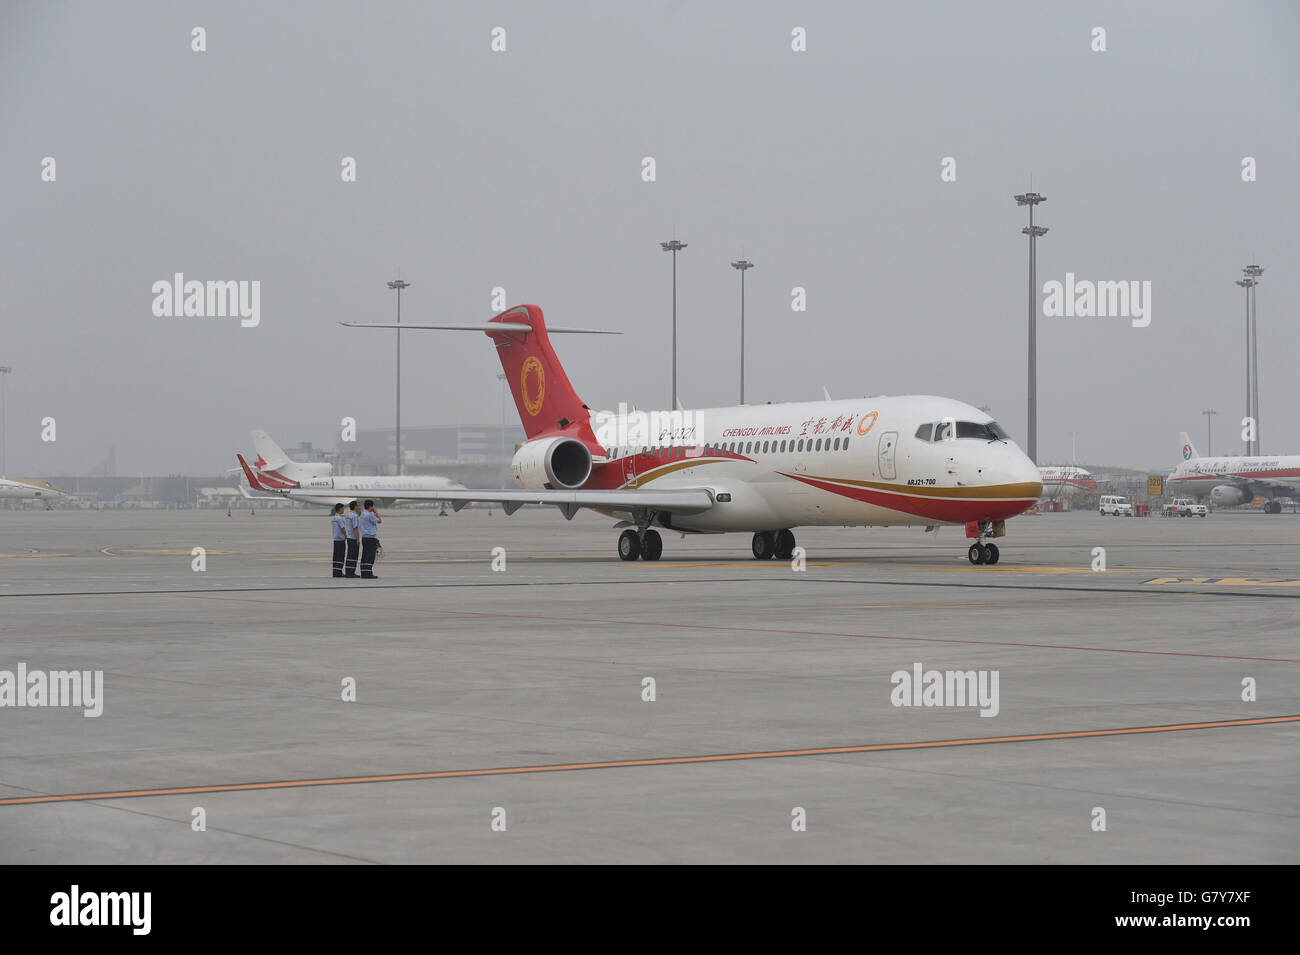 Chengdu, China's Sichuan Province. 28th June, 2016. Chengdu Airlines ARJ21-700 prepares for takeoff at Shuangliu International Airport in Chengdu, capital of southwest China's Sichuan Province, June 28, 2016. ARJ21, manufactured by the Commercial Aircraft Corp. of China (COMAC), made its maiden commercial flight from Chengdu to Shanghai Tuesday. The domestically-designed airliner is China's first regional jet manufactured according to international standards. © Liu Kun/Xinhua/Alamy Live News Stock Photo